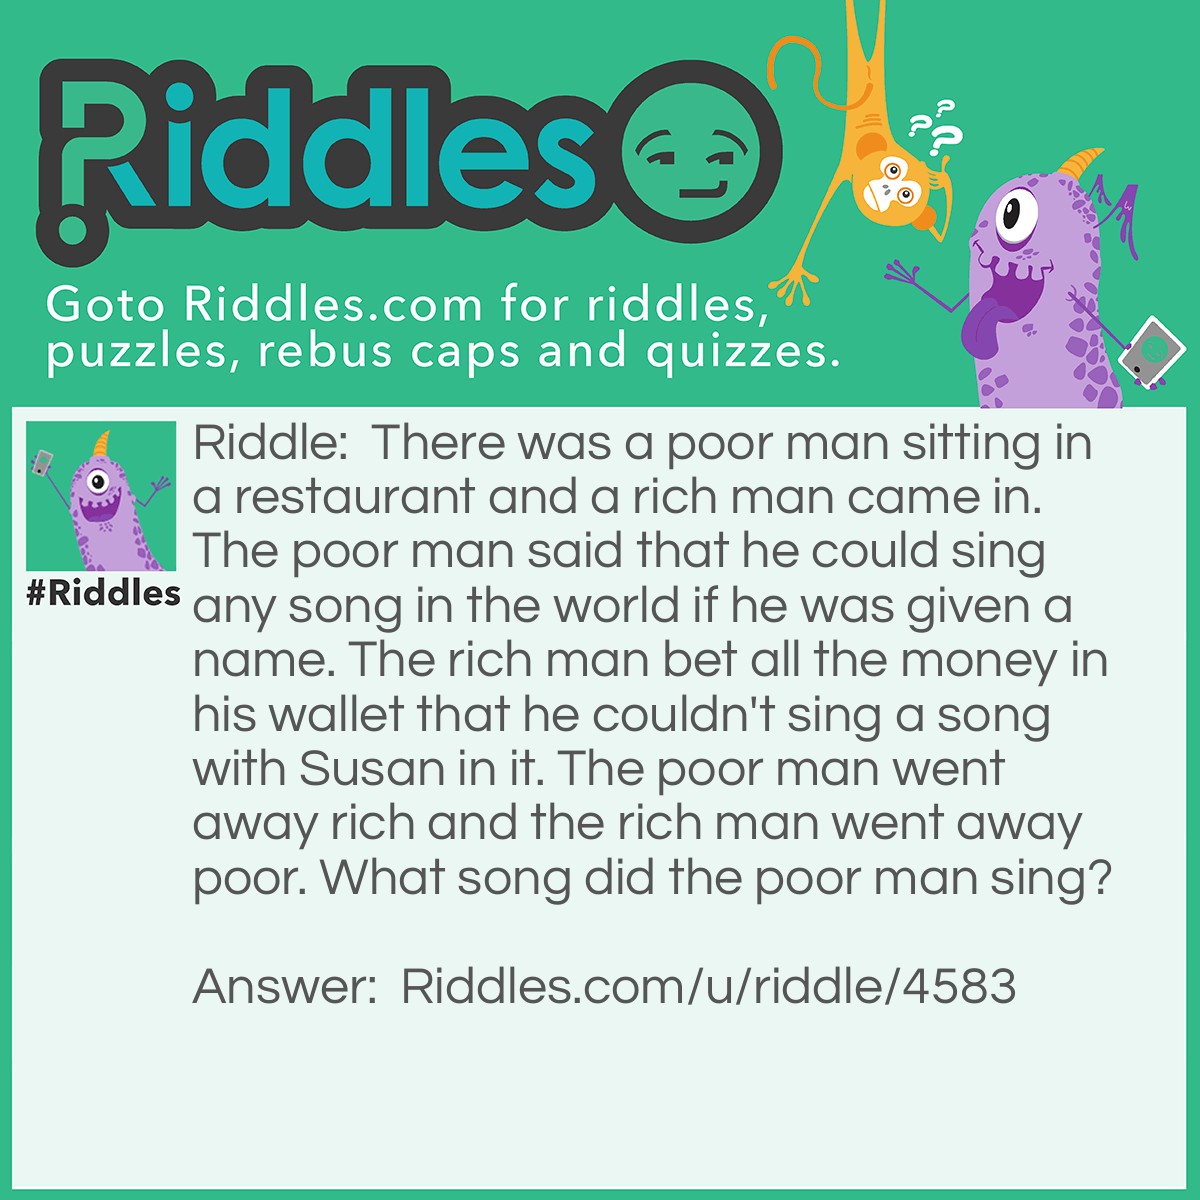 Riddle: There was a poor man sitting in a restaurant and a rich man came in. The poor man said that he could sing any song in the world if he was given a name. The rich man bet all the money in his wallet that he couldn't sing a song with Susan in it. The poor man went away rich and the rich man went away poor. What song did the poor man sing? Answer: Happy birthday.